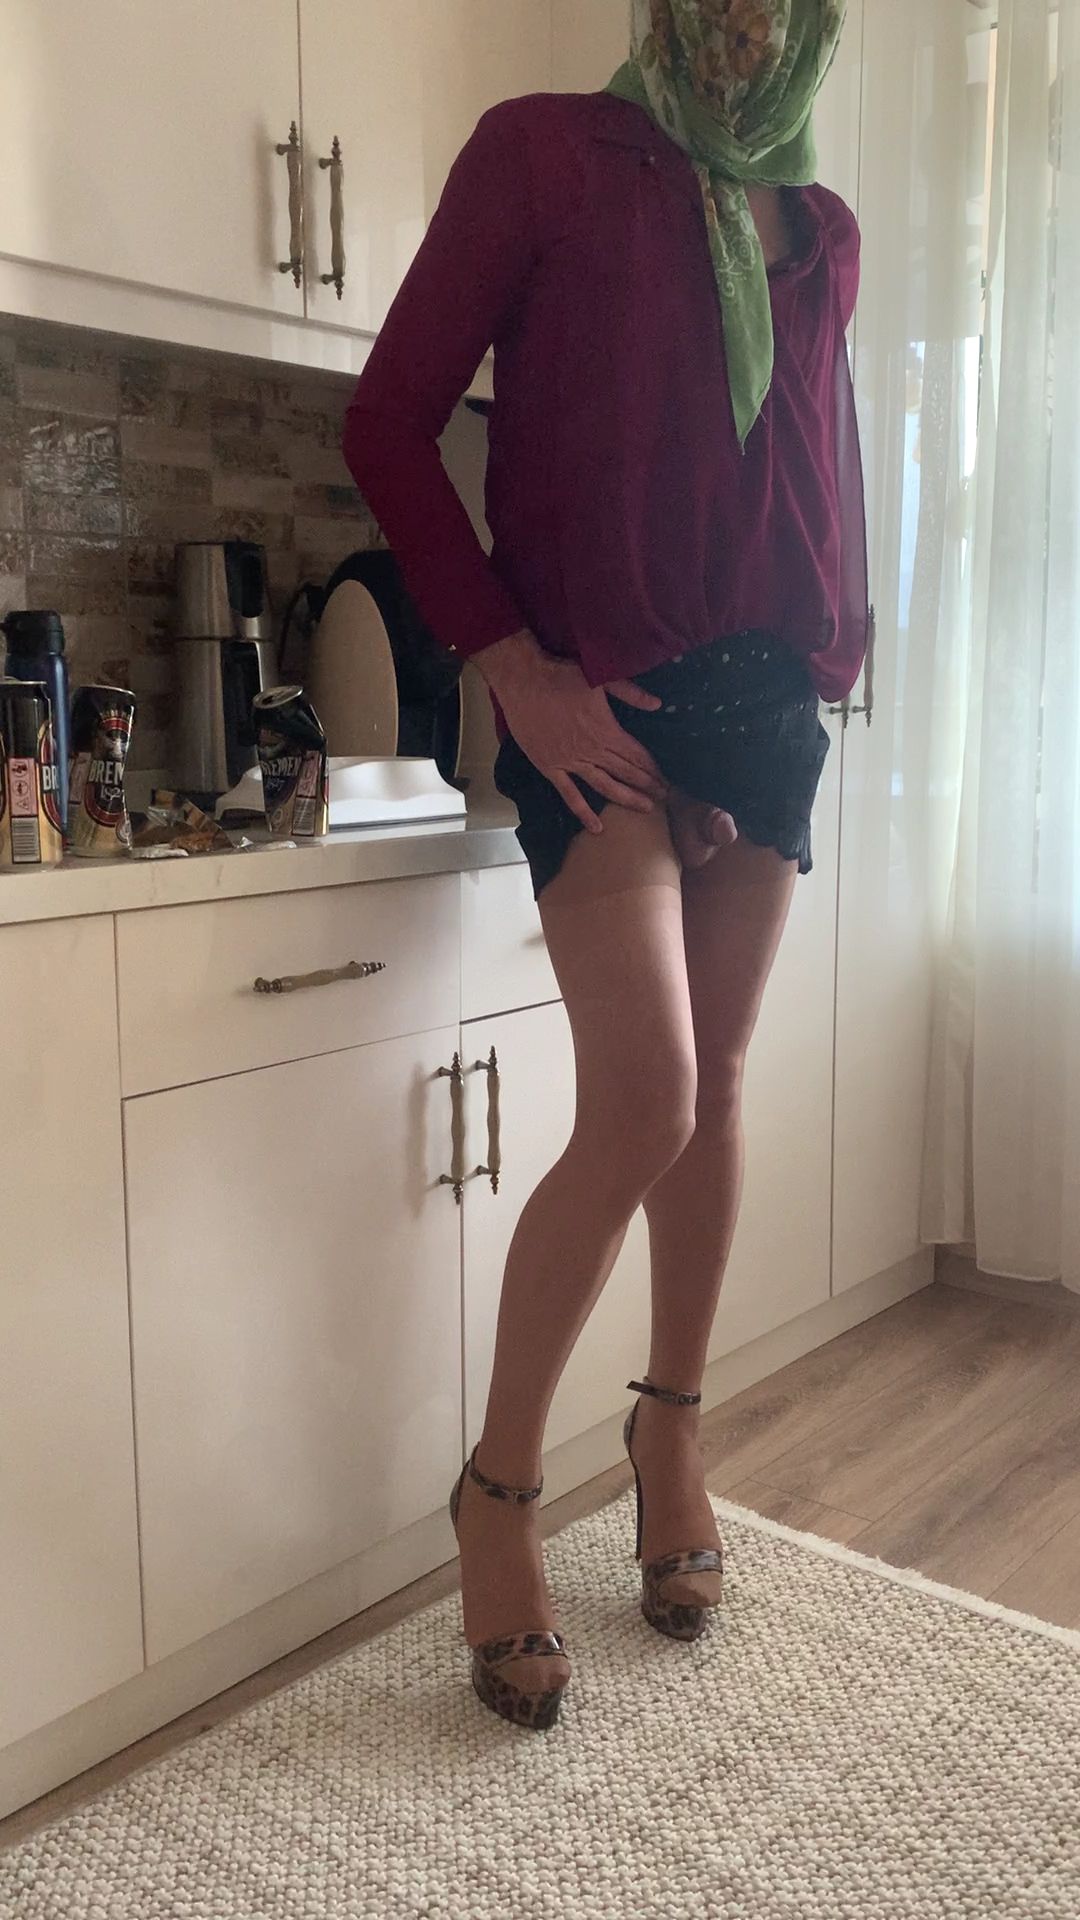 My Mom's Friend and her SMiniskirt #38